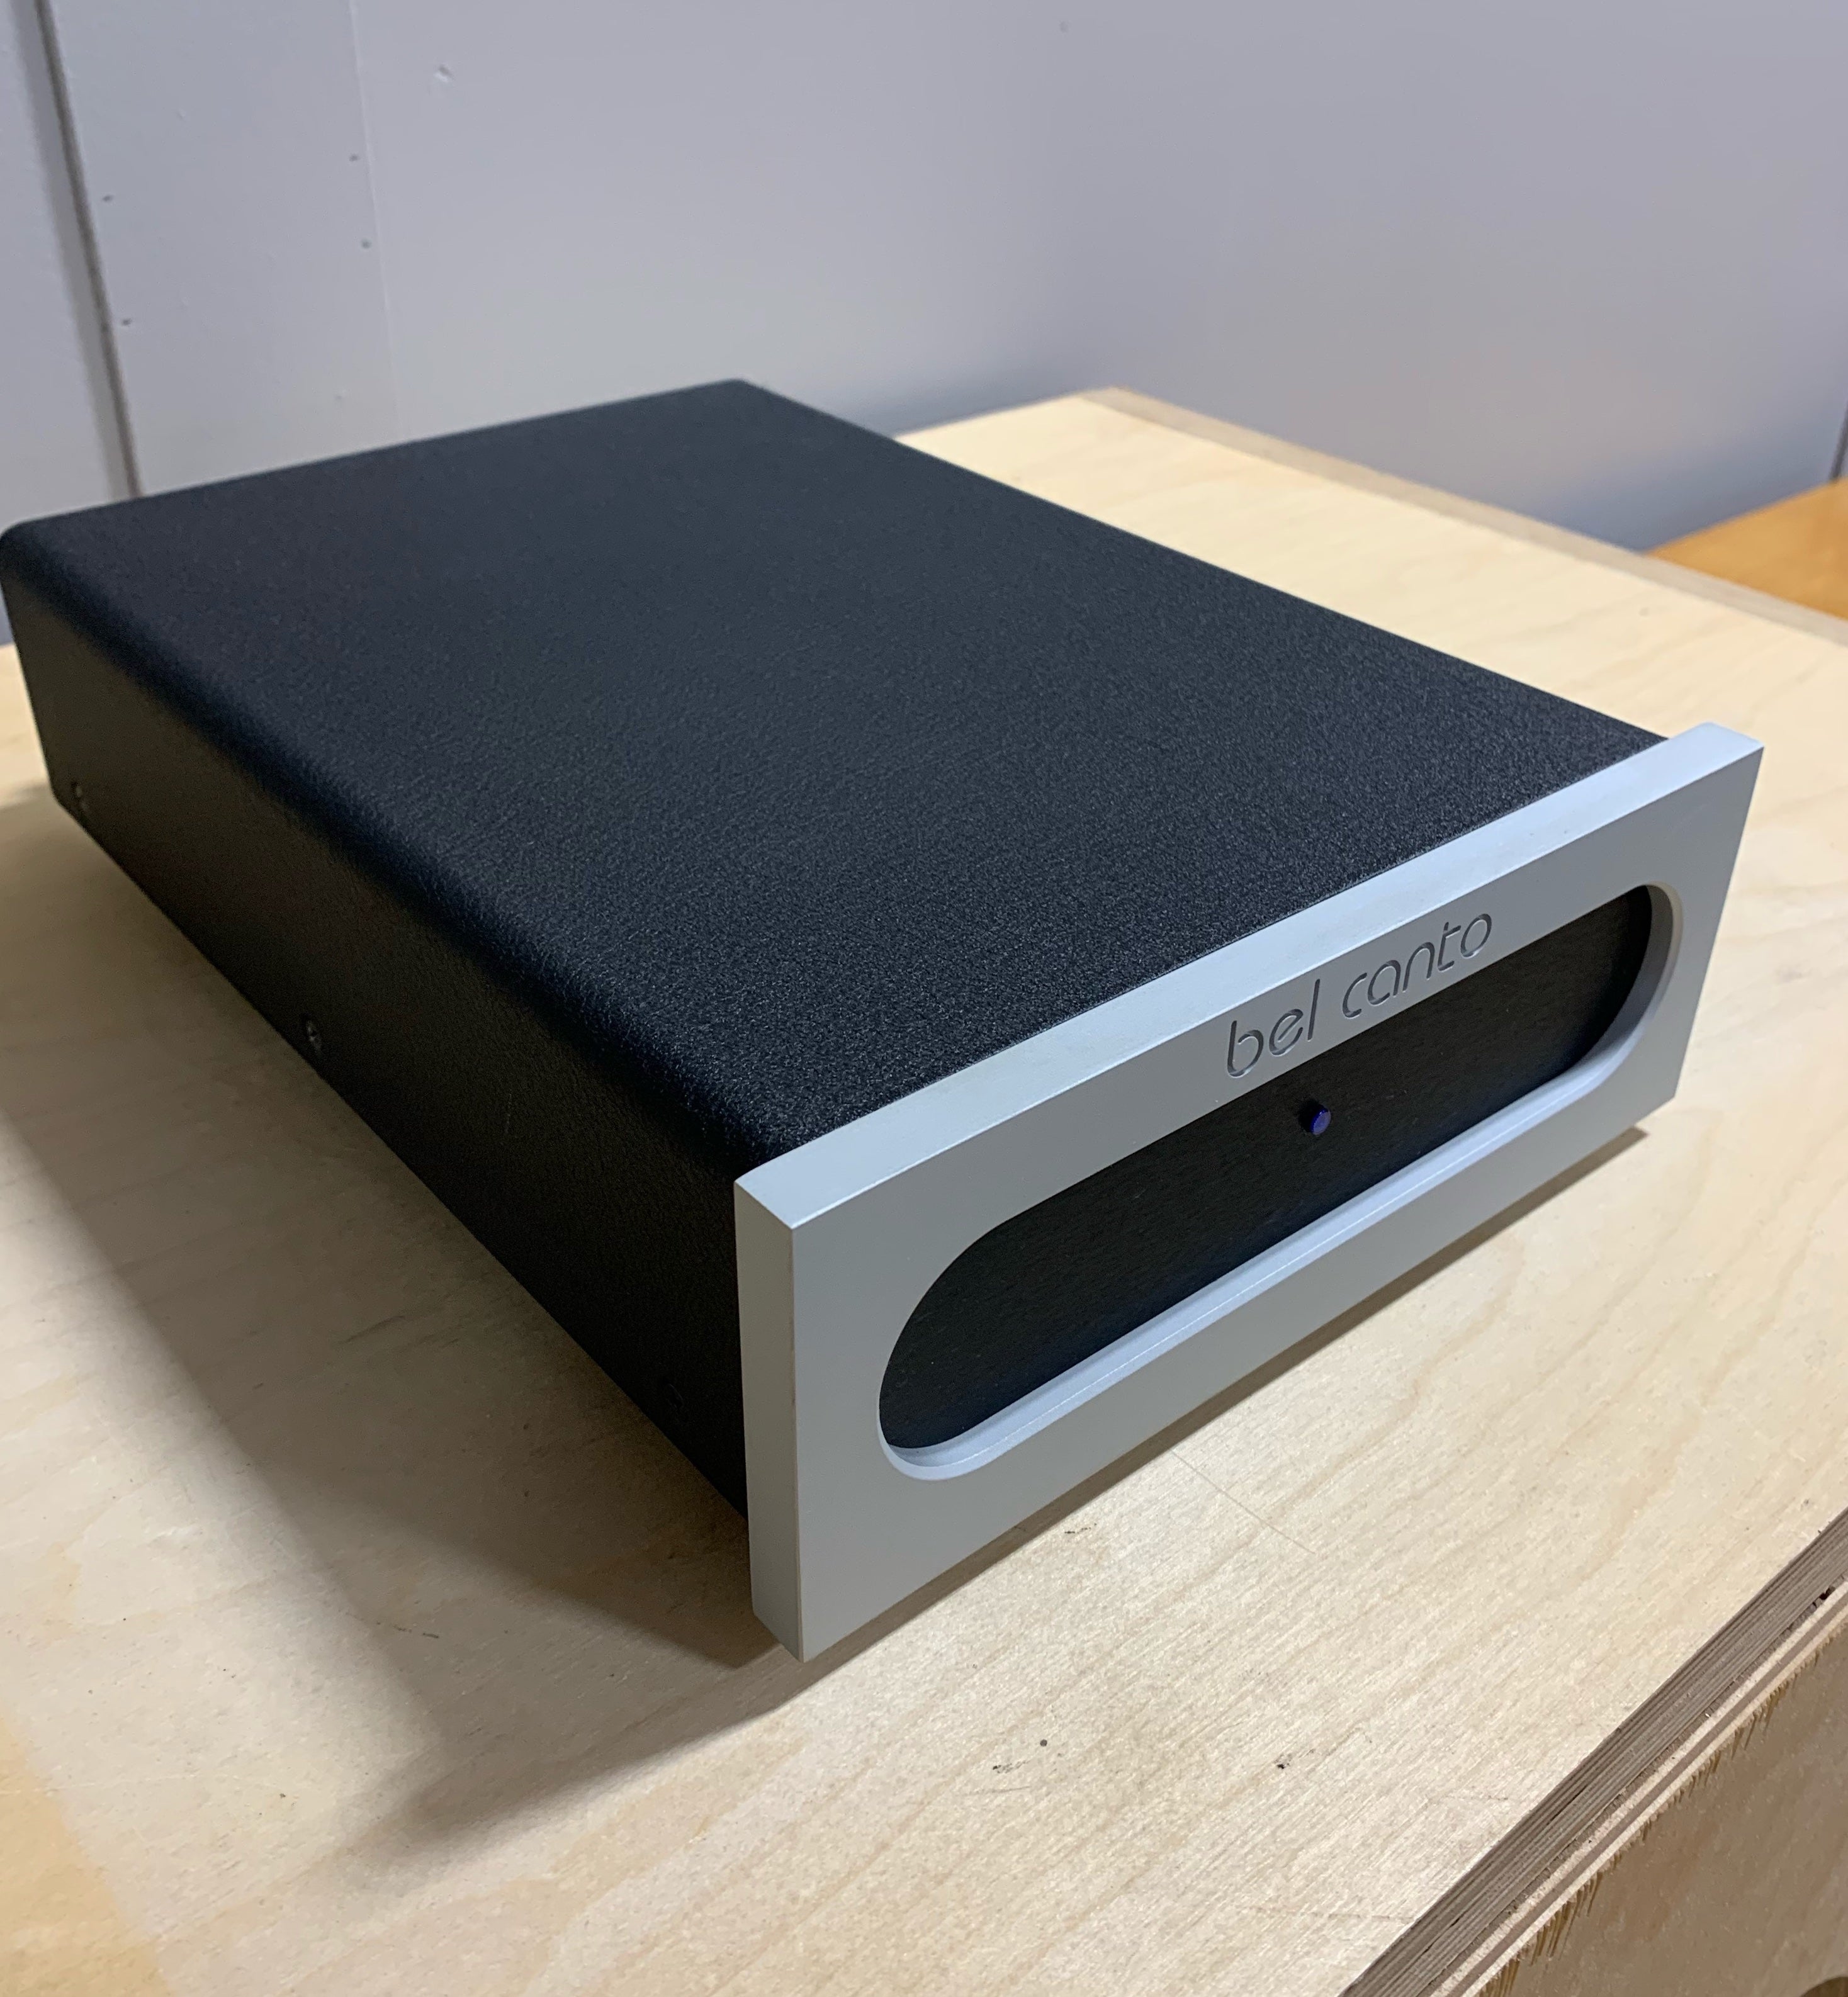 Bel Canto S300 Stereo Power Amplifier - SOLD